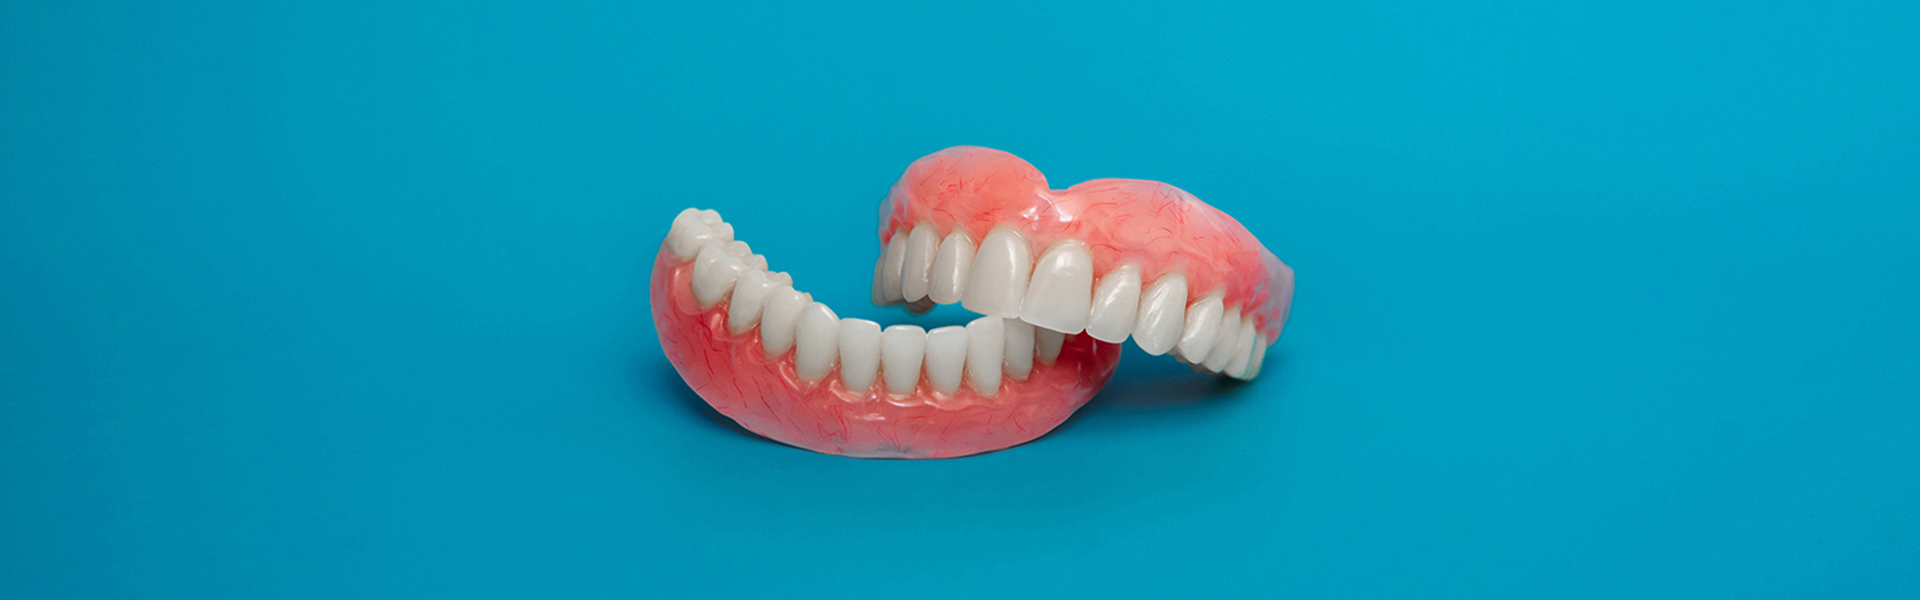 How does the choice of a denture provider impact the quality of dentures?